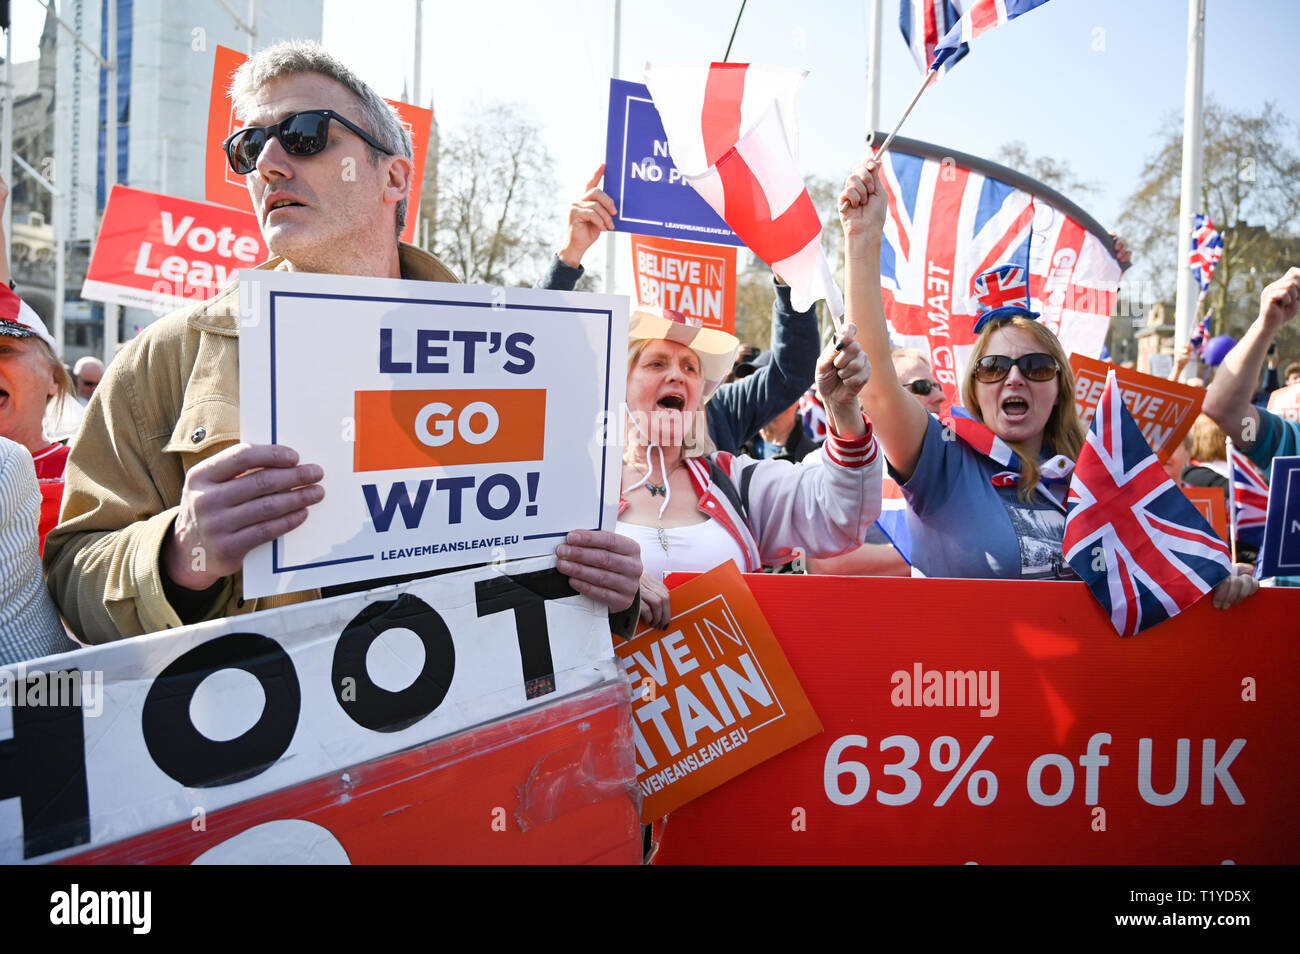 London, UK. 29th Mar, 2019. Pro Brexit supporters block off the streets around Parliament Square London today as they show their anger at not leaving the EU today causing traffic chaos in the city . MP's are sitting today to debate leaving the European Parliament on the day it was originally supposed to happen Credit: Simon Dack/Alamy Live News Stock Photo